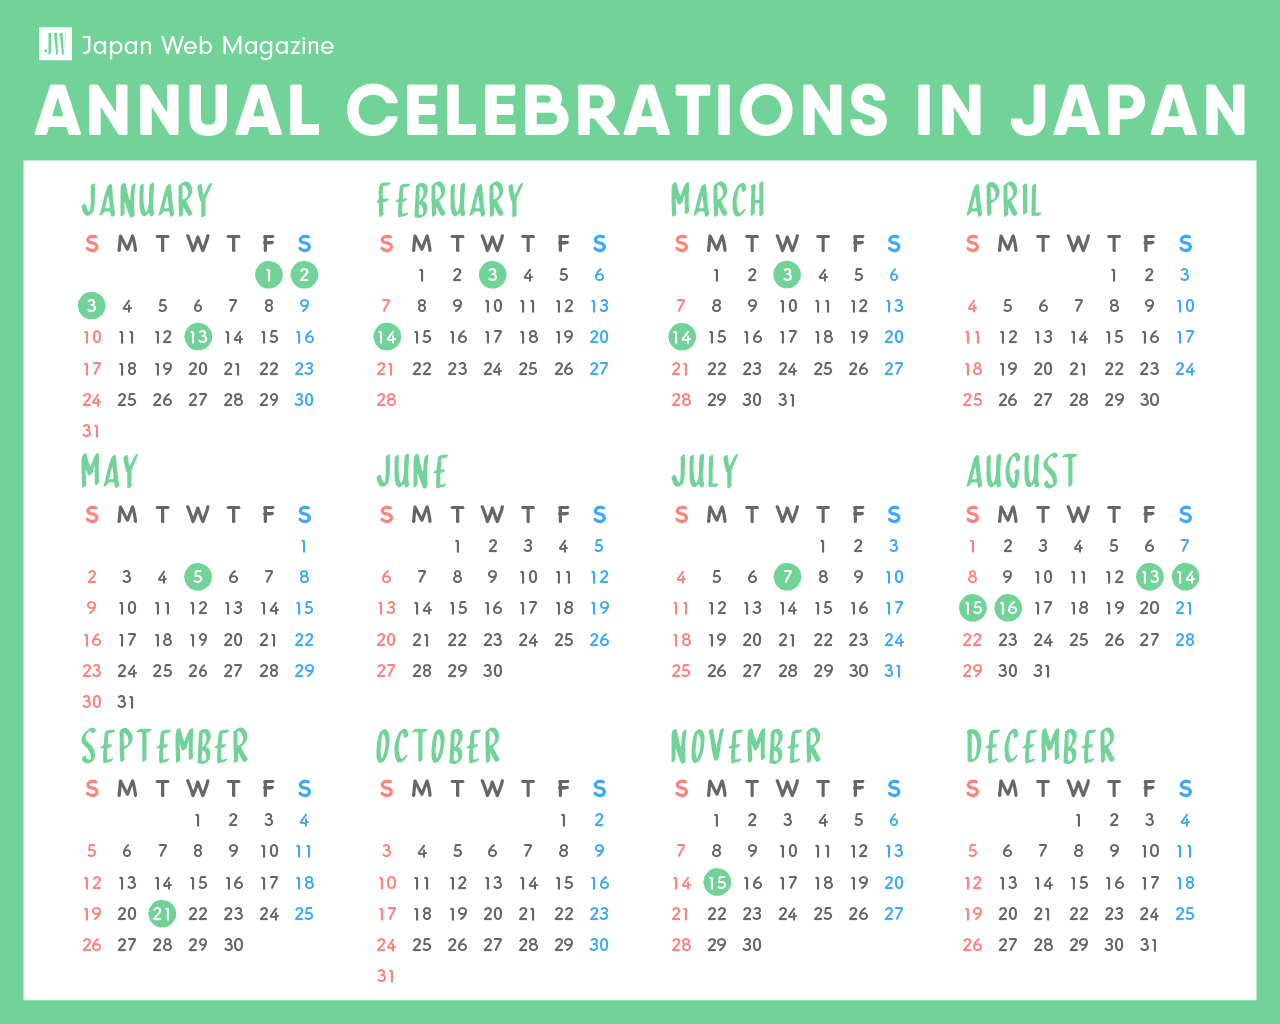 Annual Celebrations in Japan